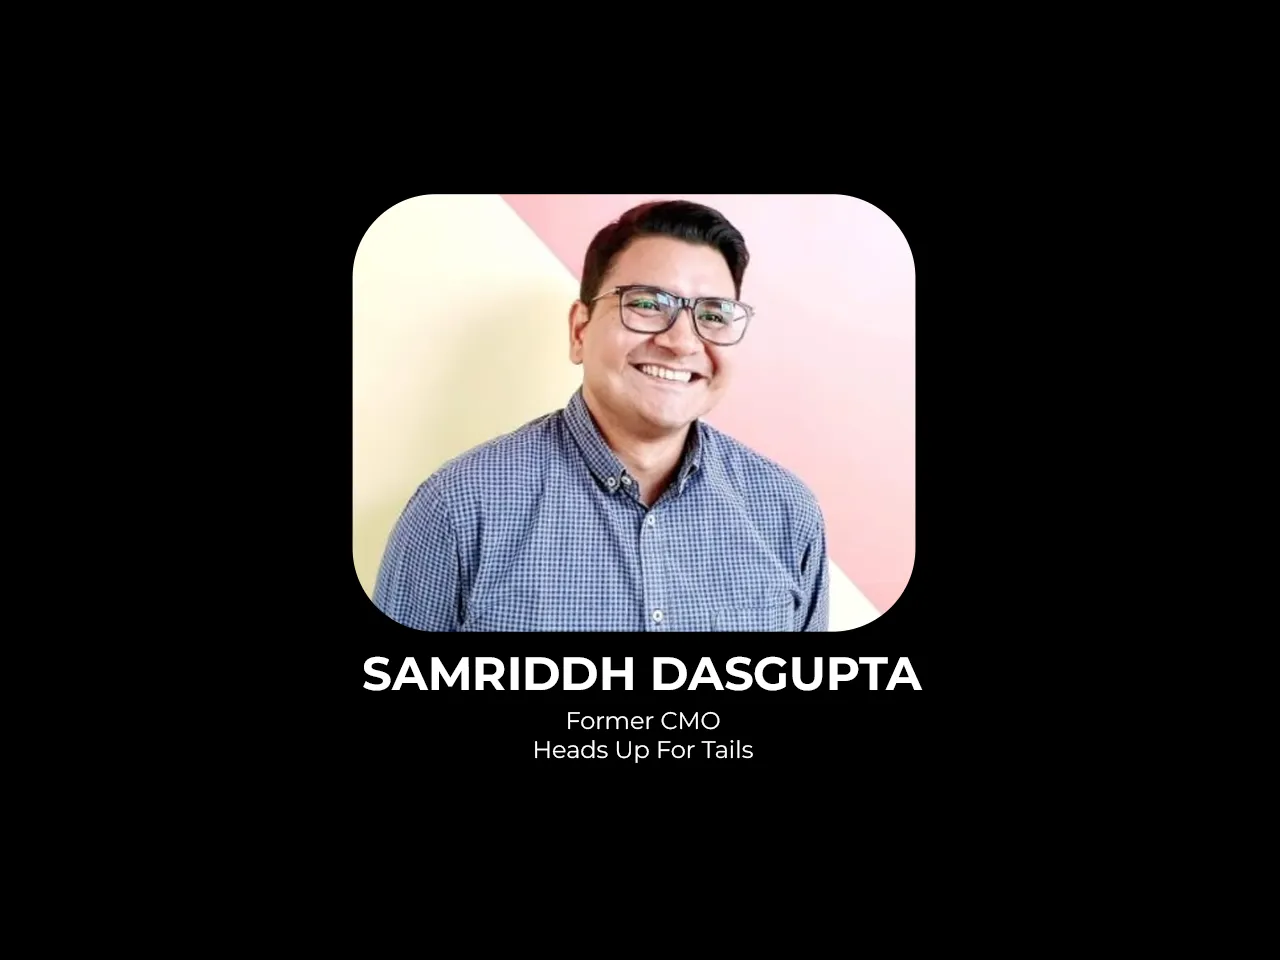 Samriddh Dasgupta steps down as CMO of Heads Up For Tails